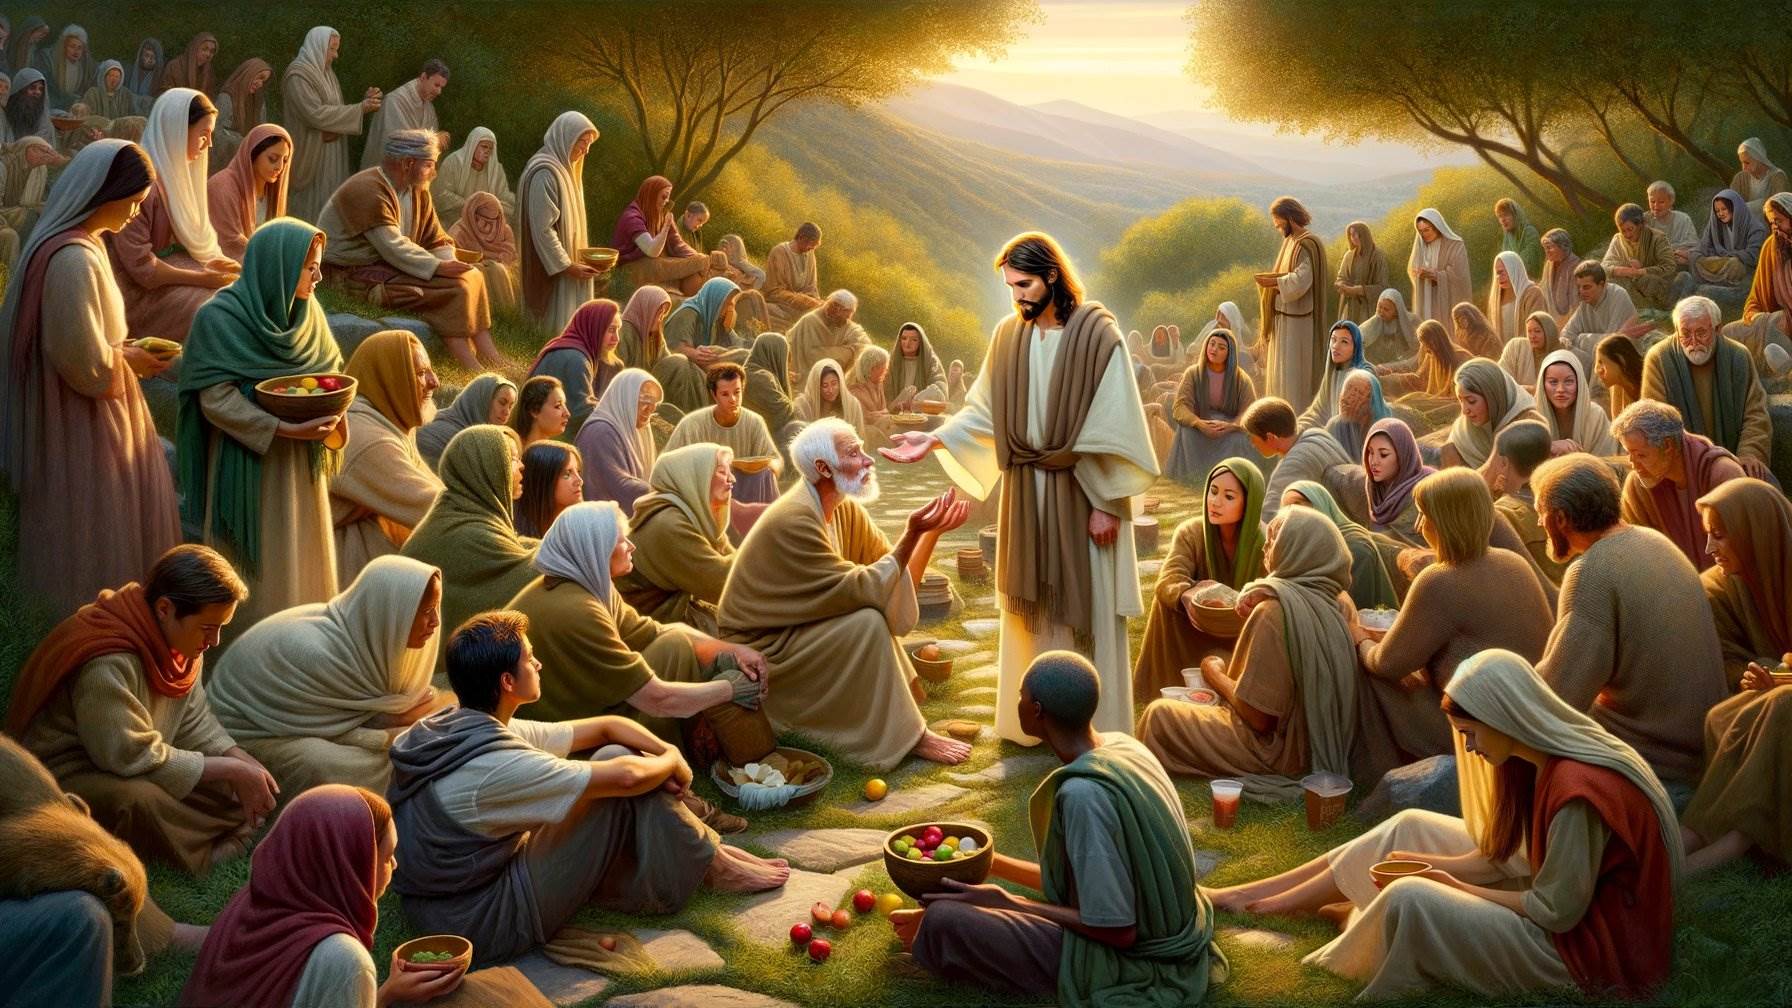 Jesus Christ Taught Us How To Serve Others | Christian.net